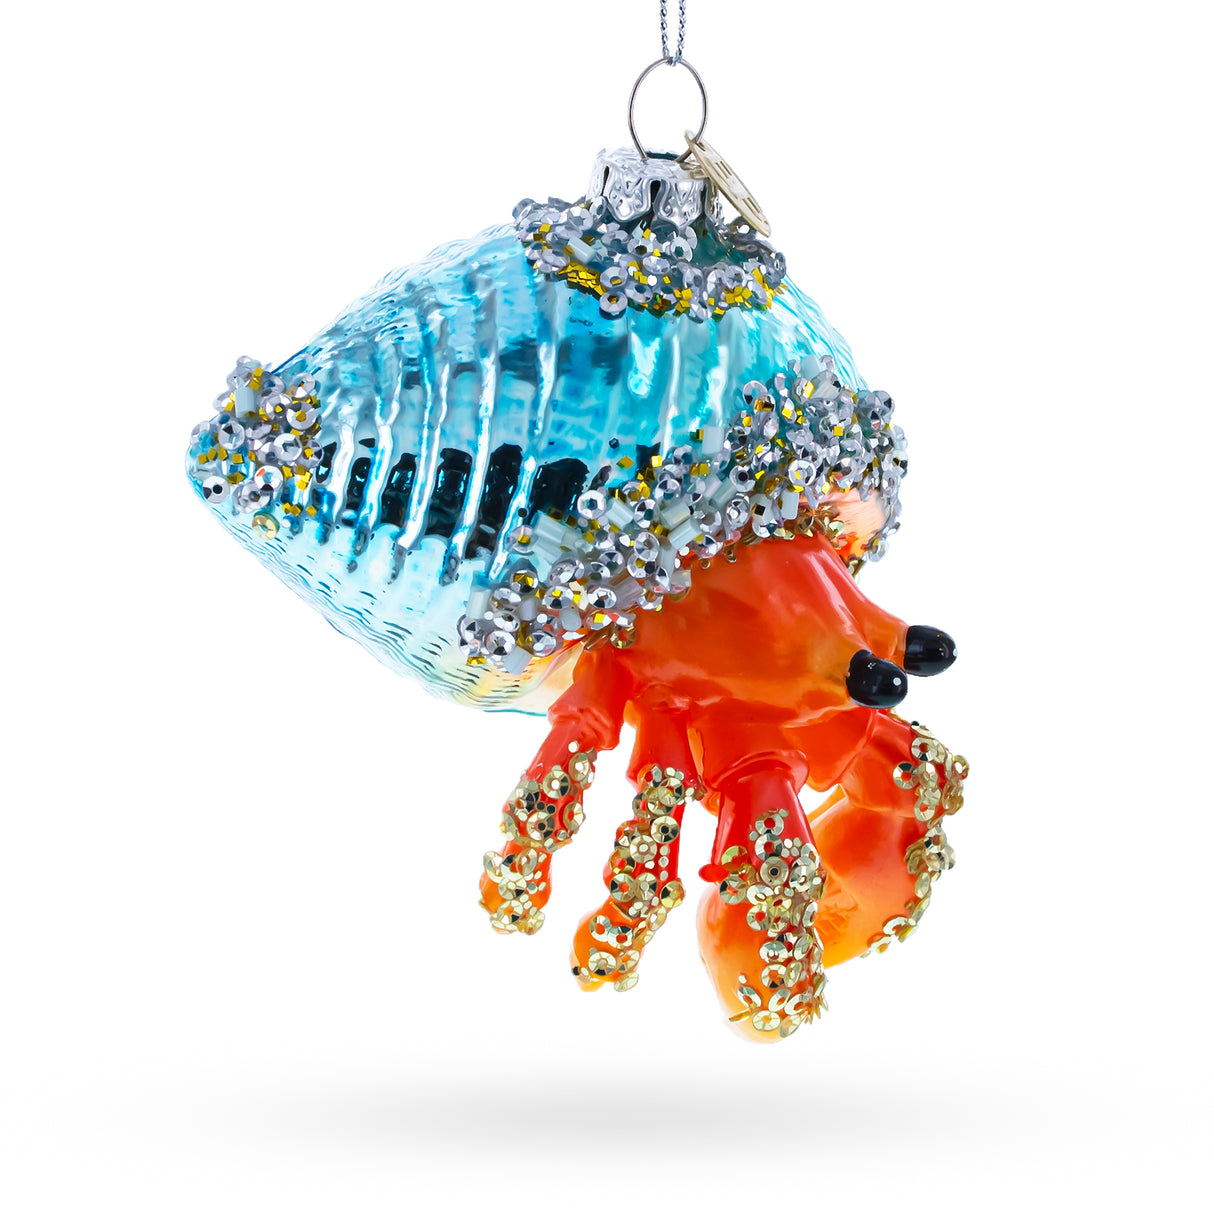 Buy Christmas Ornaments Animals Fish and Sea World Crabs by BestPysanky Online Gift Ship